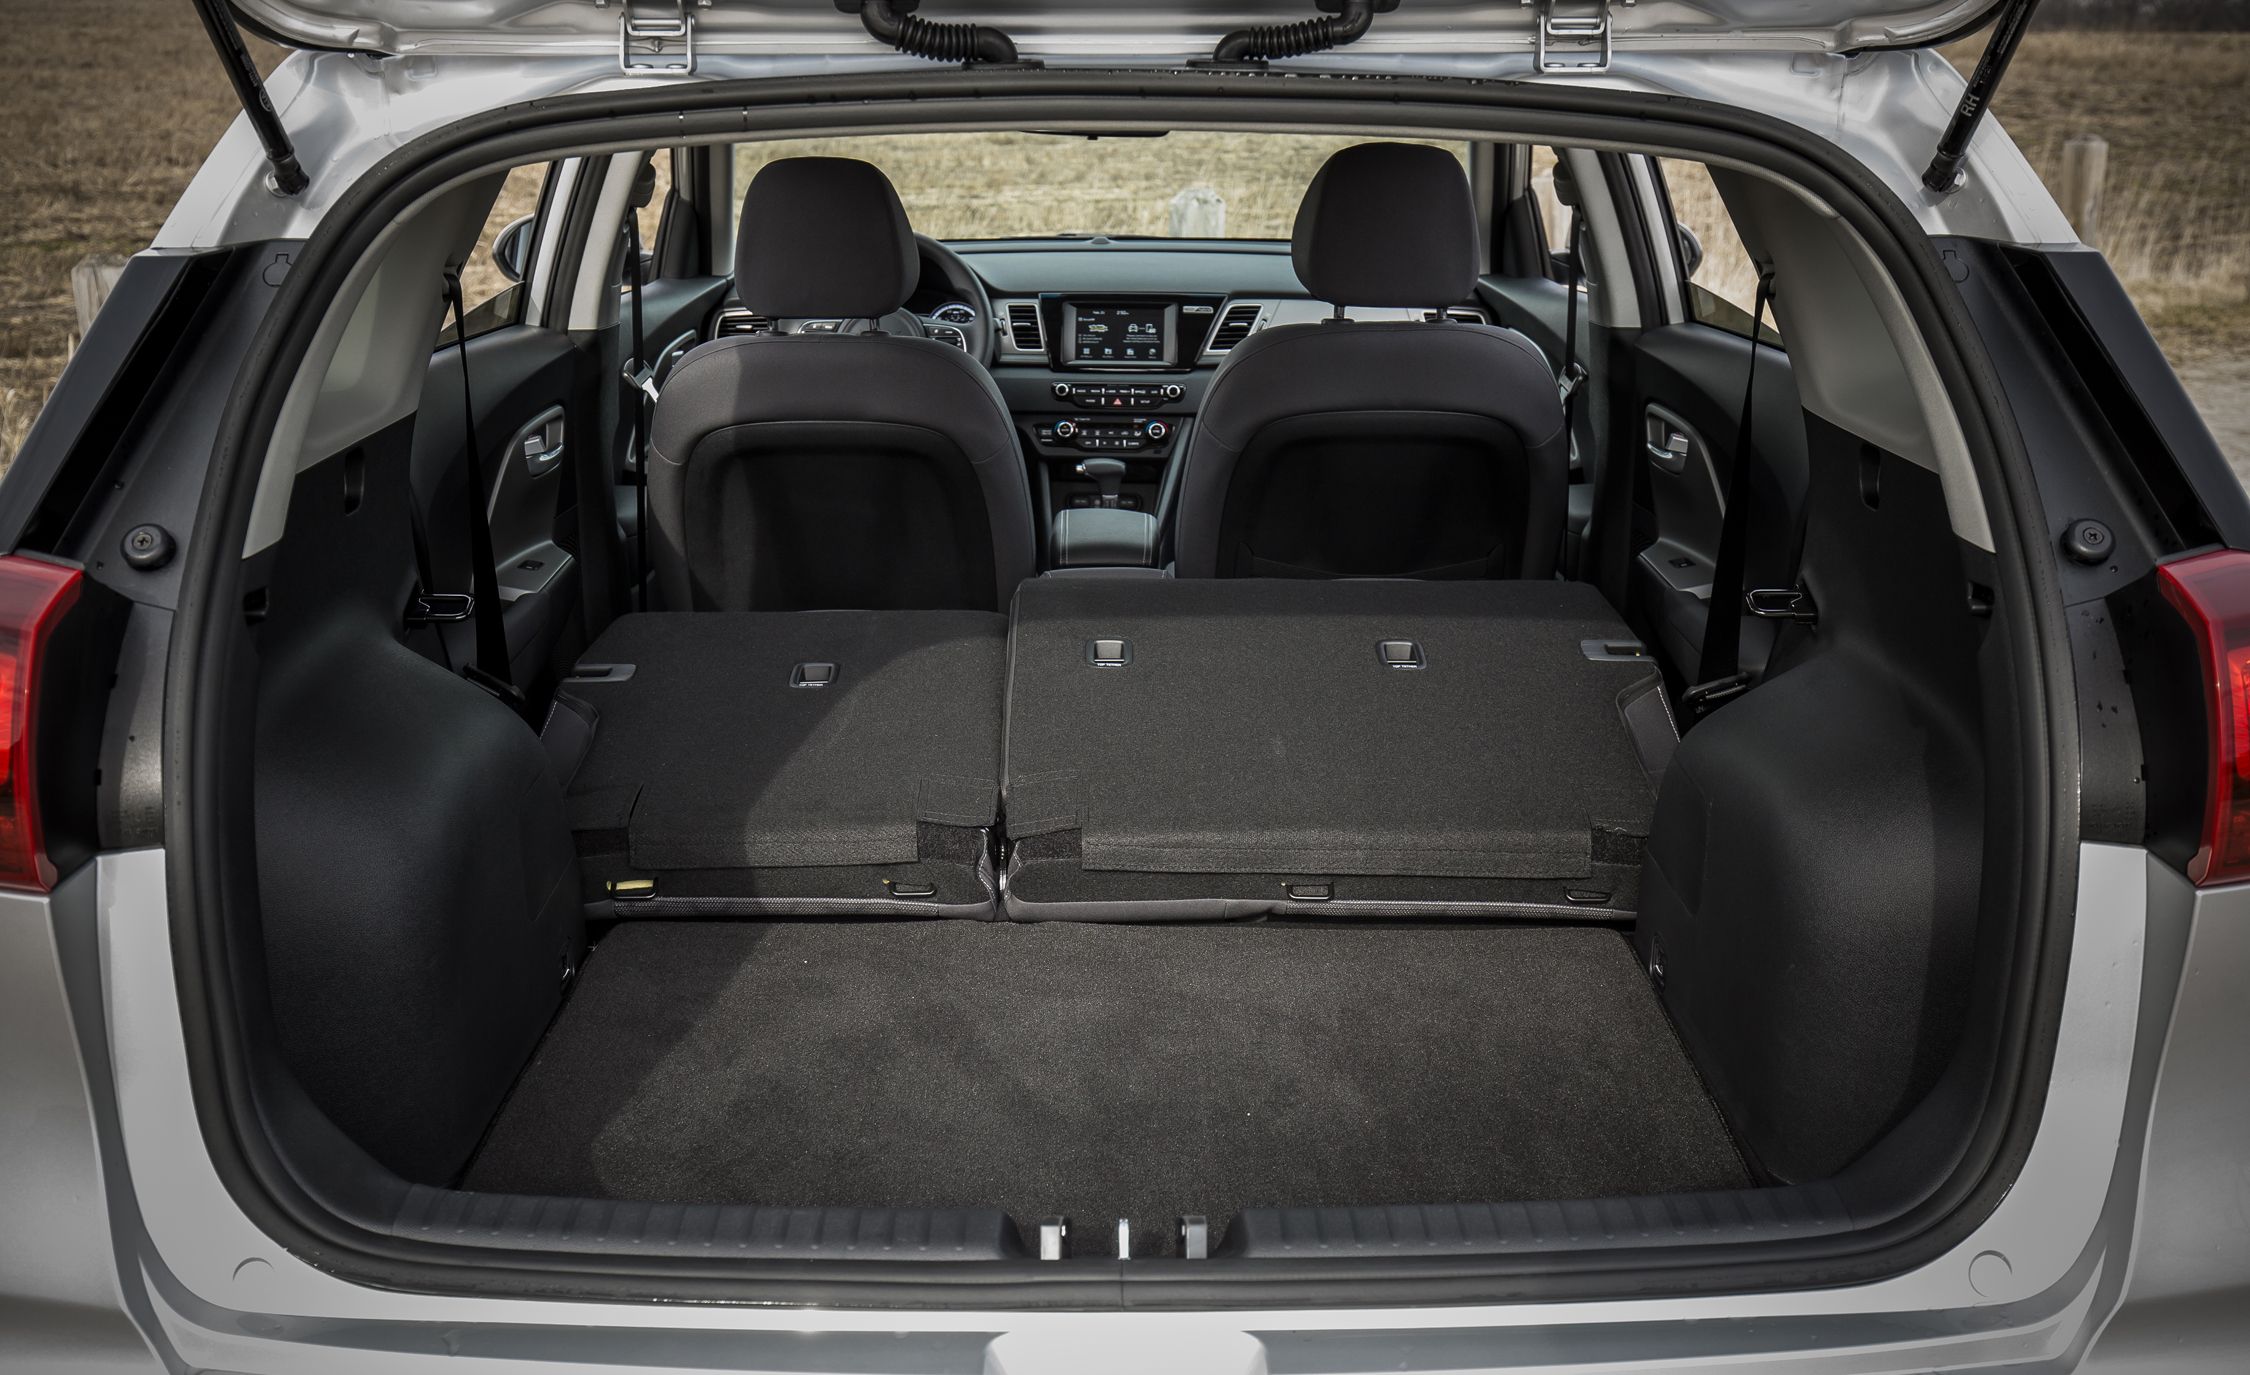 2022 Kia Niro Cargo Space and Storage Review Car and 